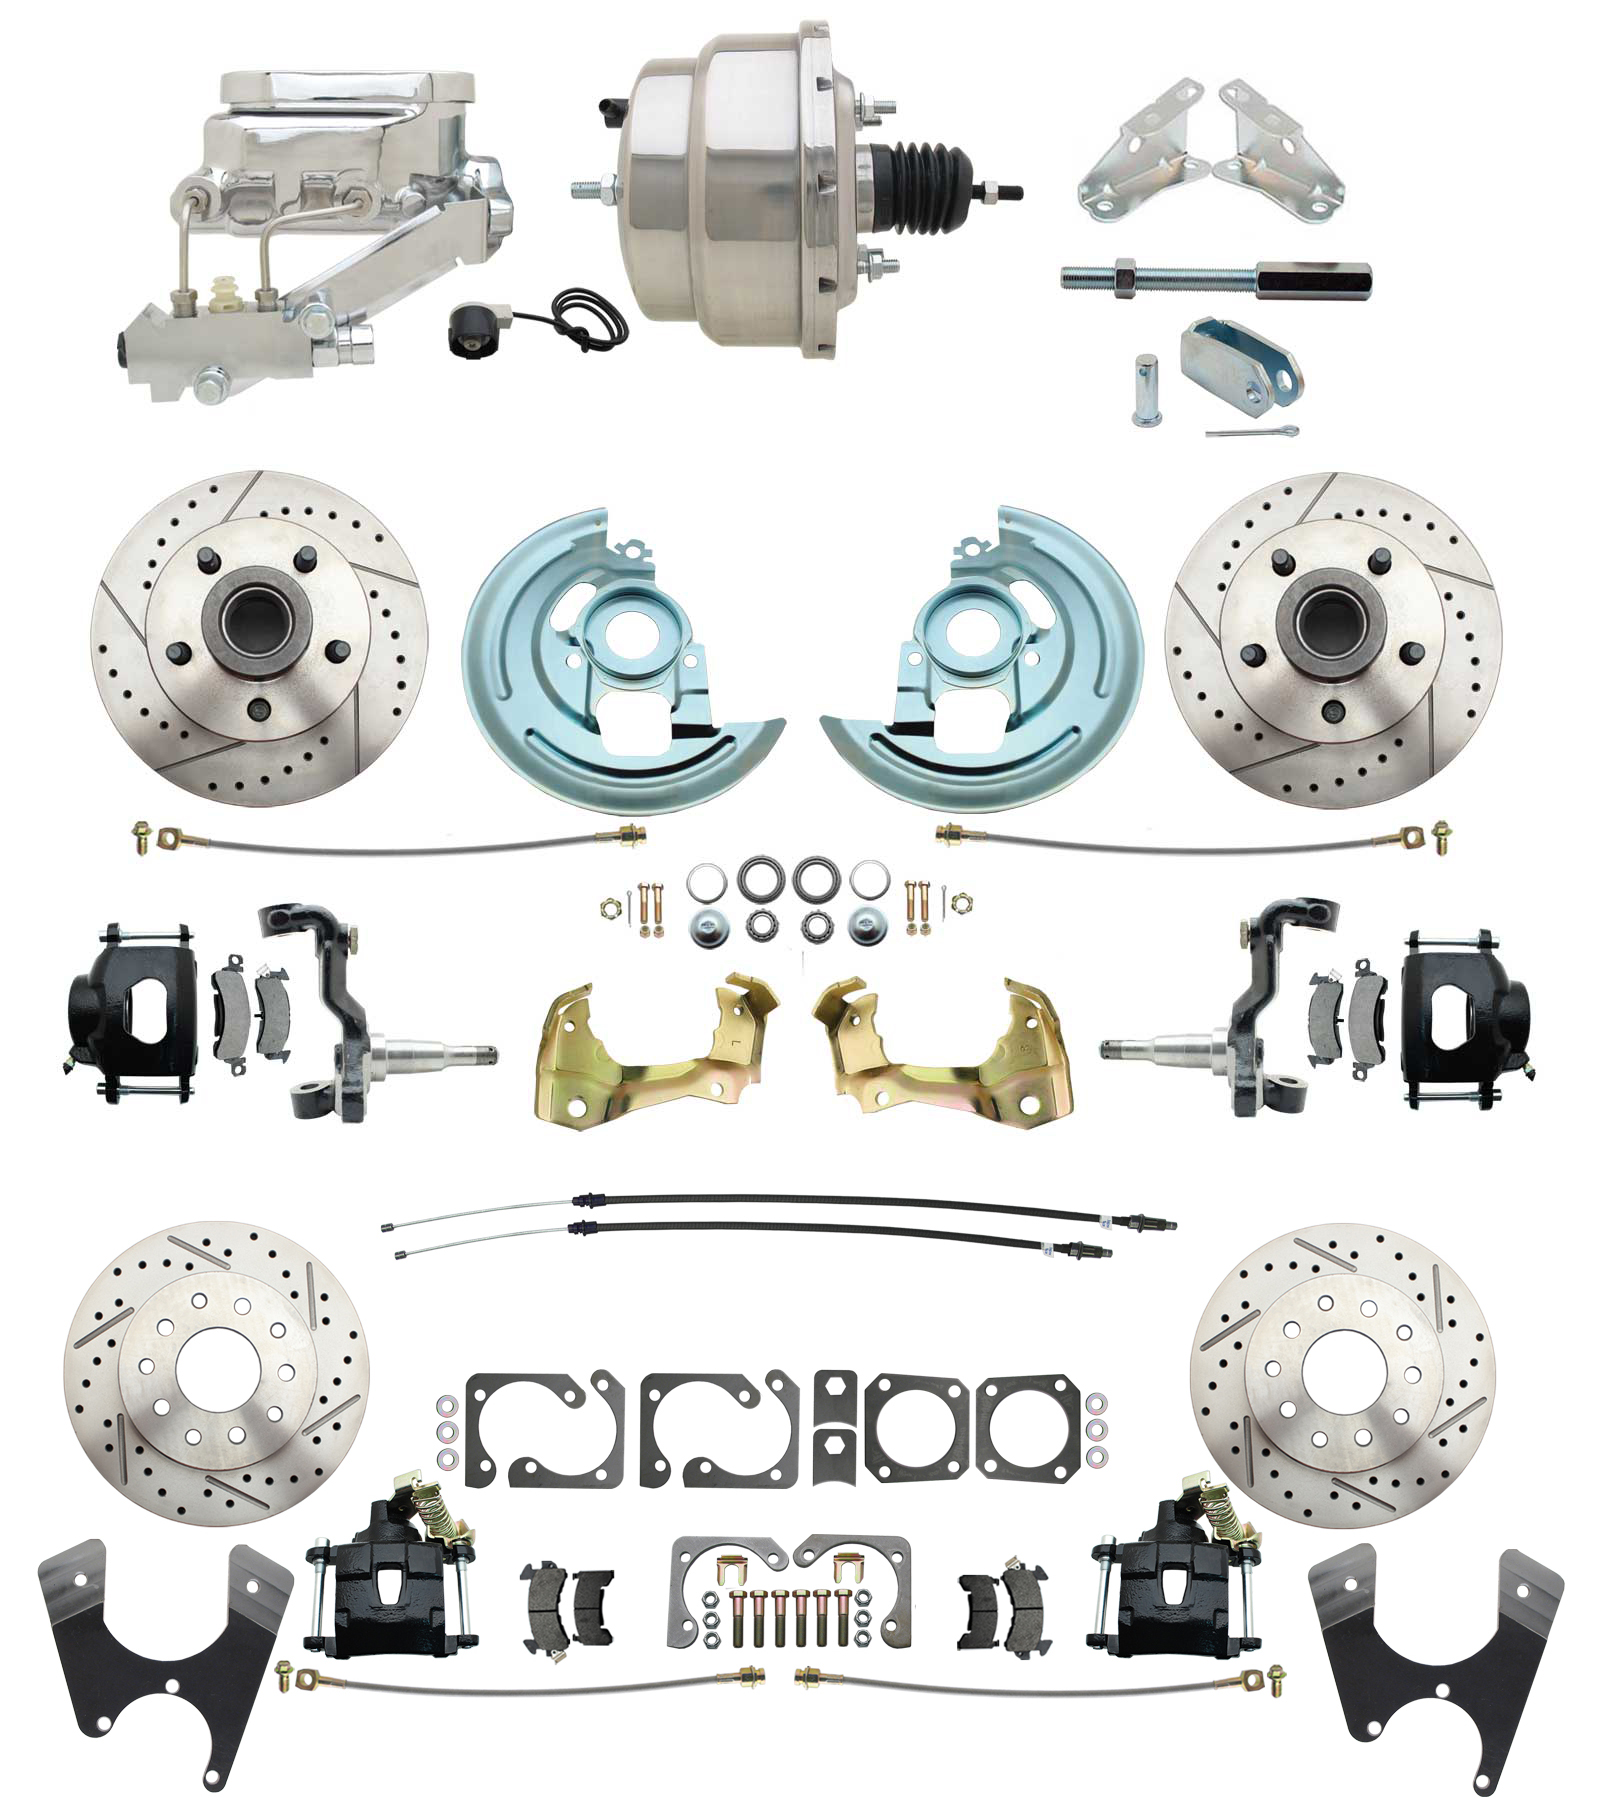 1967-1969 Camaro/ Firebird & 1968-1974 Chevy Nova Front & Rear Power Disc Brake Conversion Kit Drilled & Slotted & Powder Coated Black Calipers Rotors W/8 Dual Chrome Flat Top Booster Kit